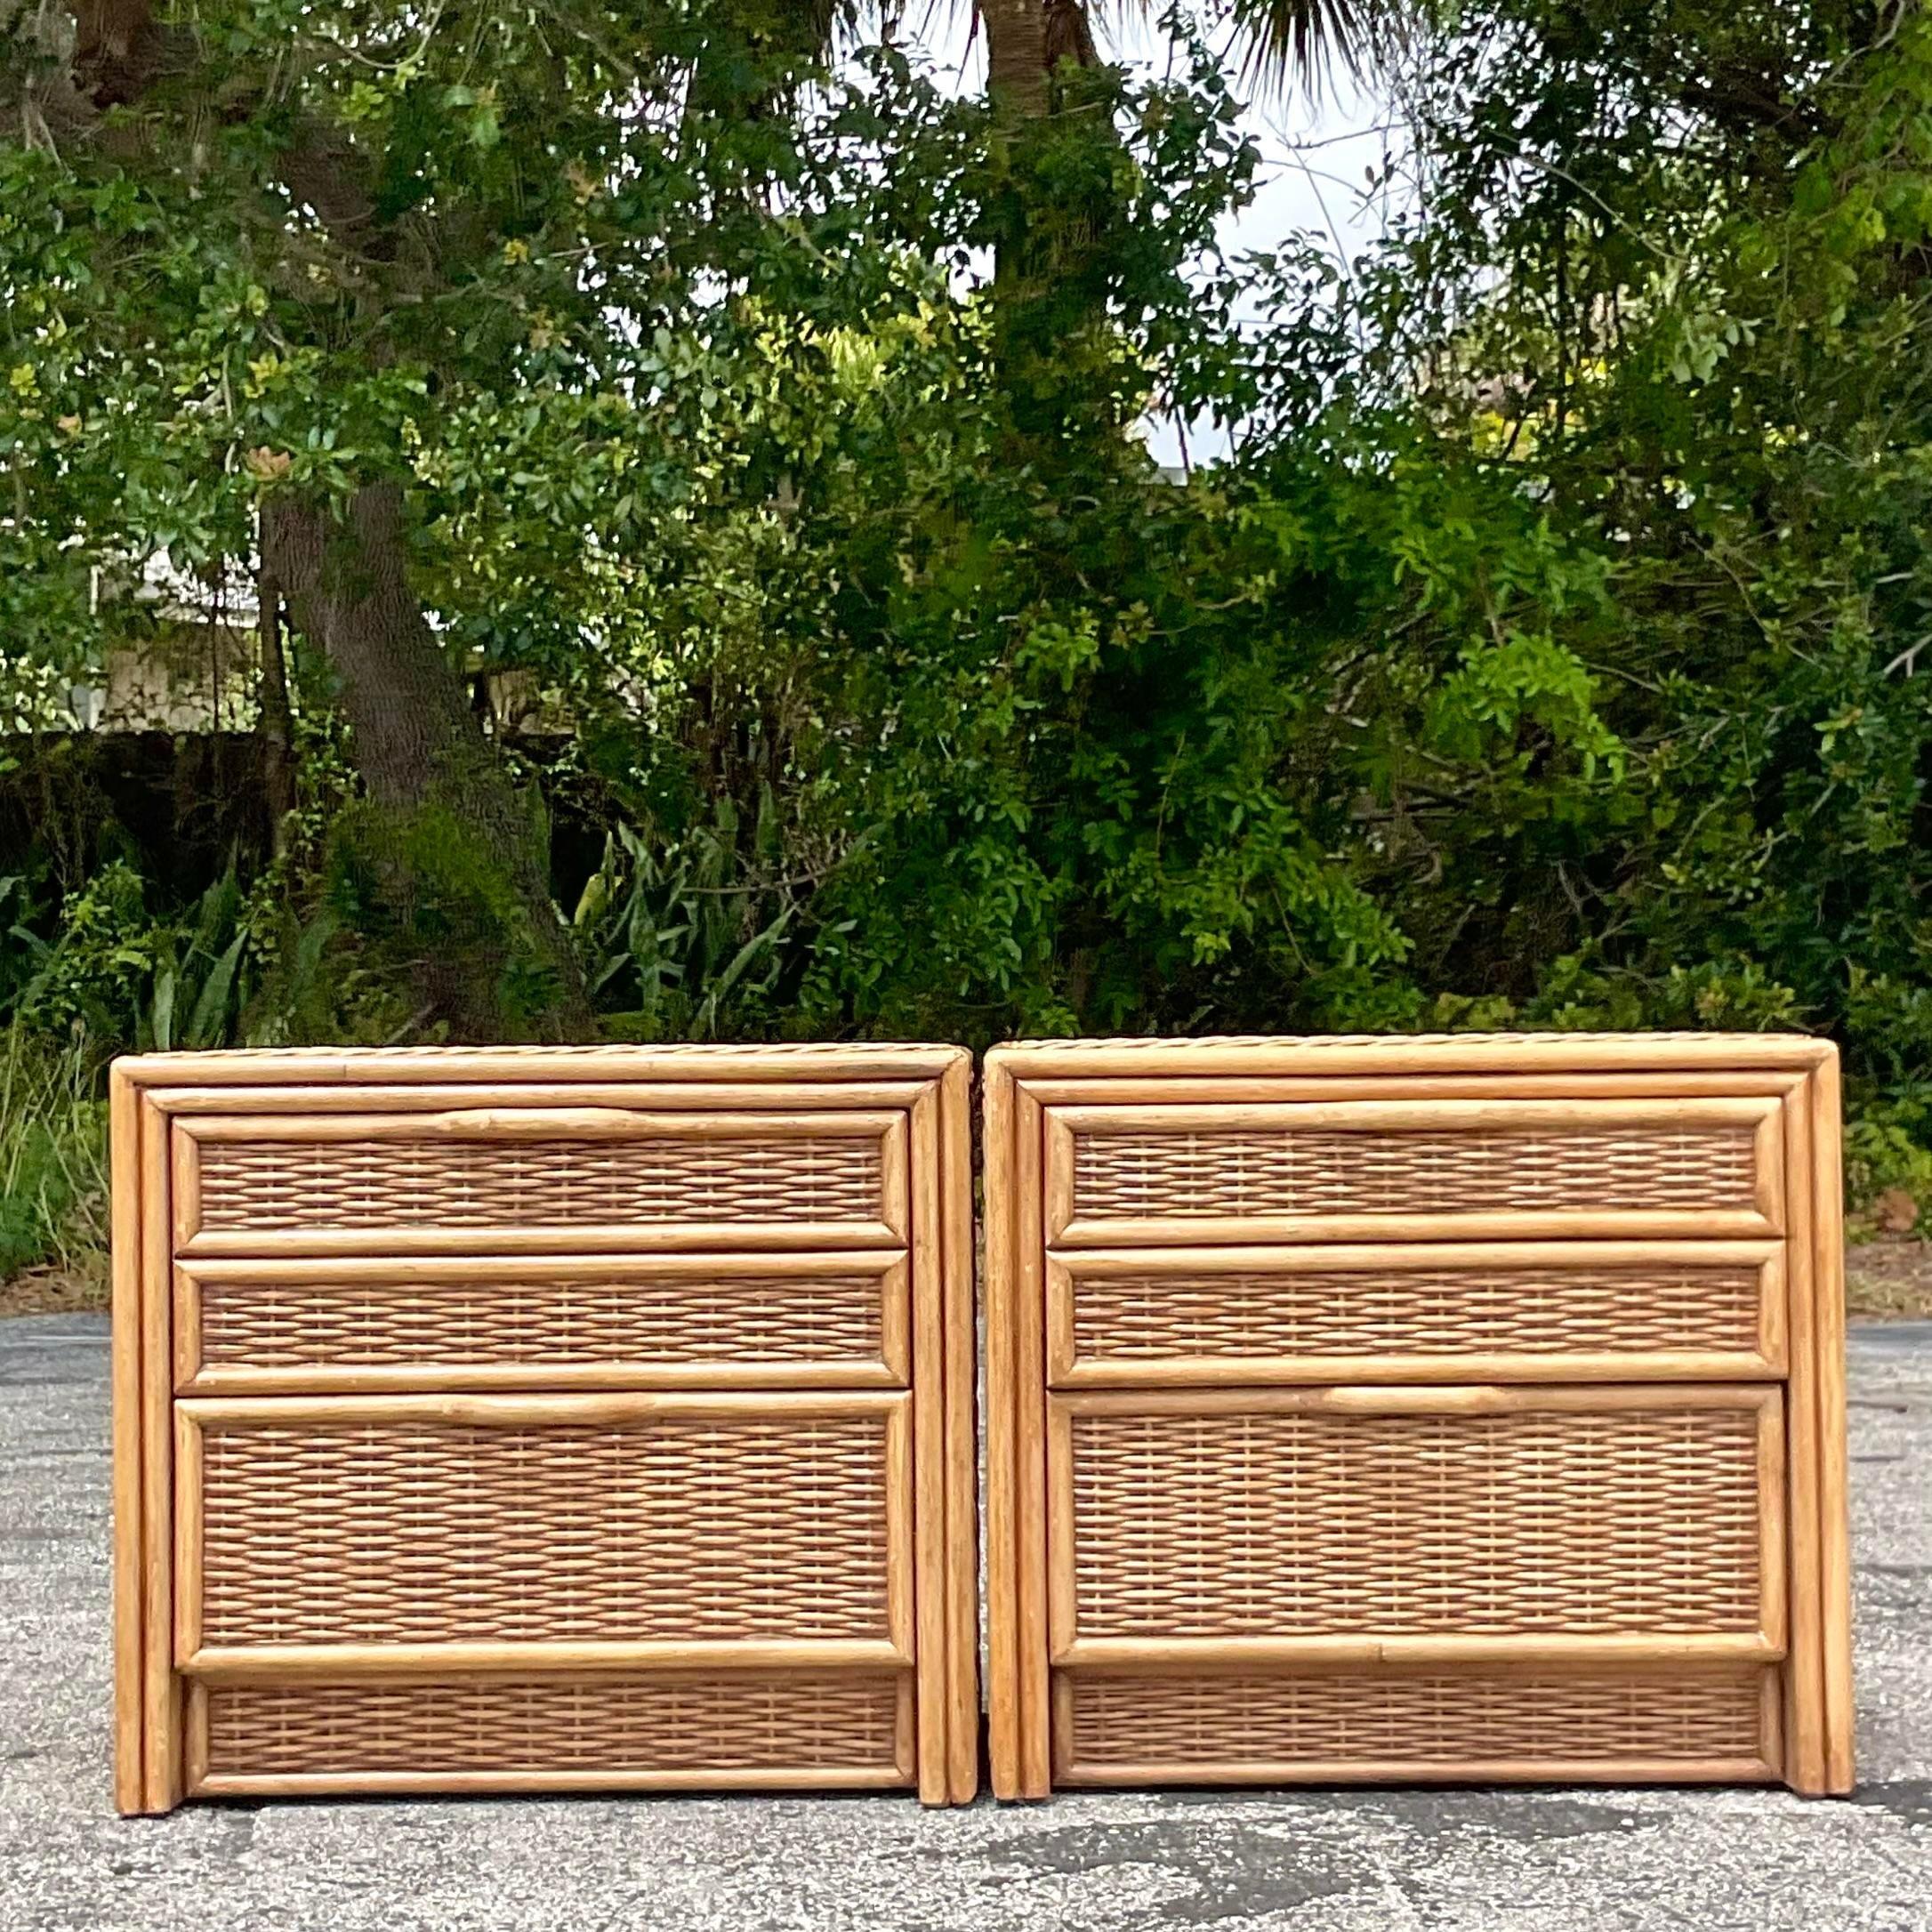 Late 20th Century Vintage Coastal Woven Rattan Nightstands - a Pair For Sale 1